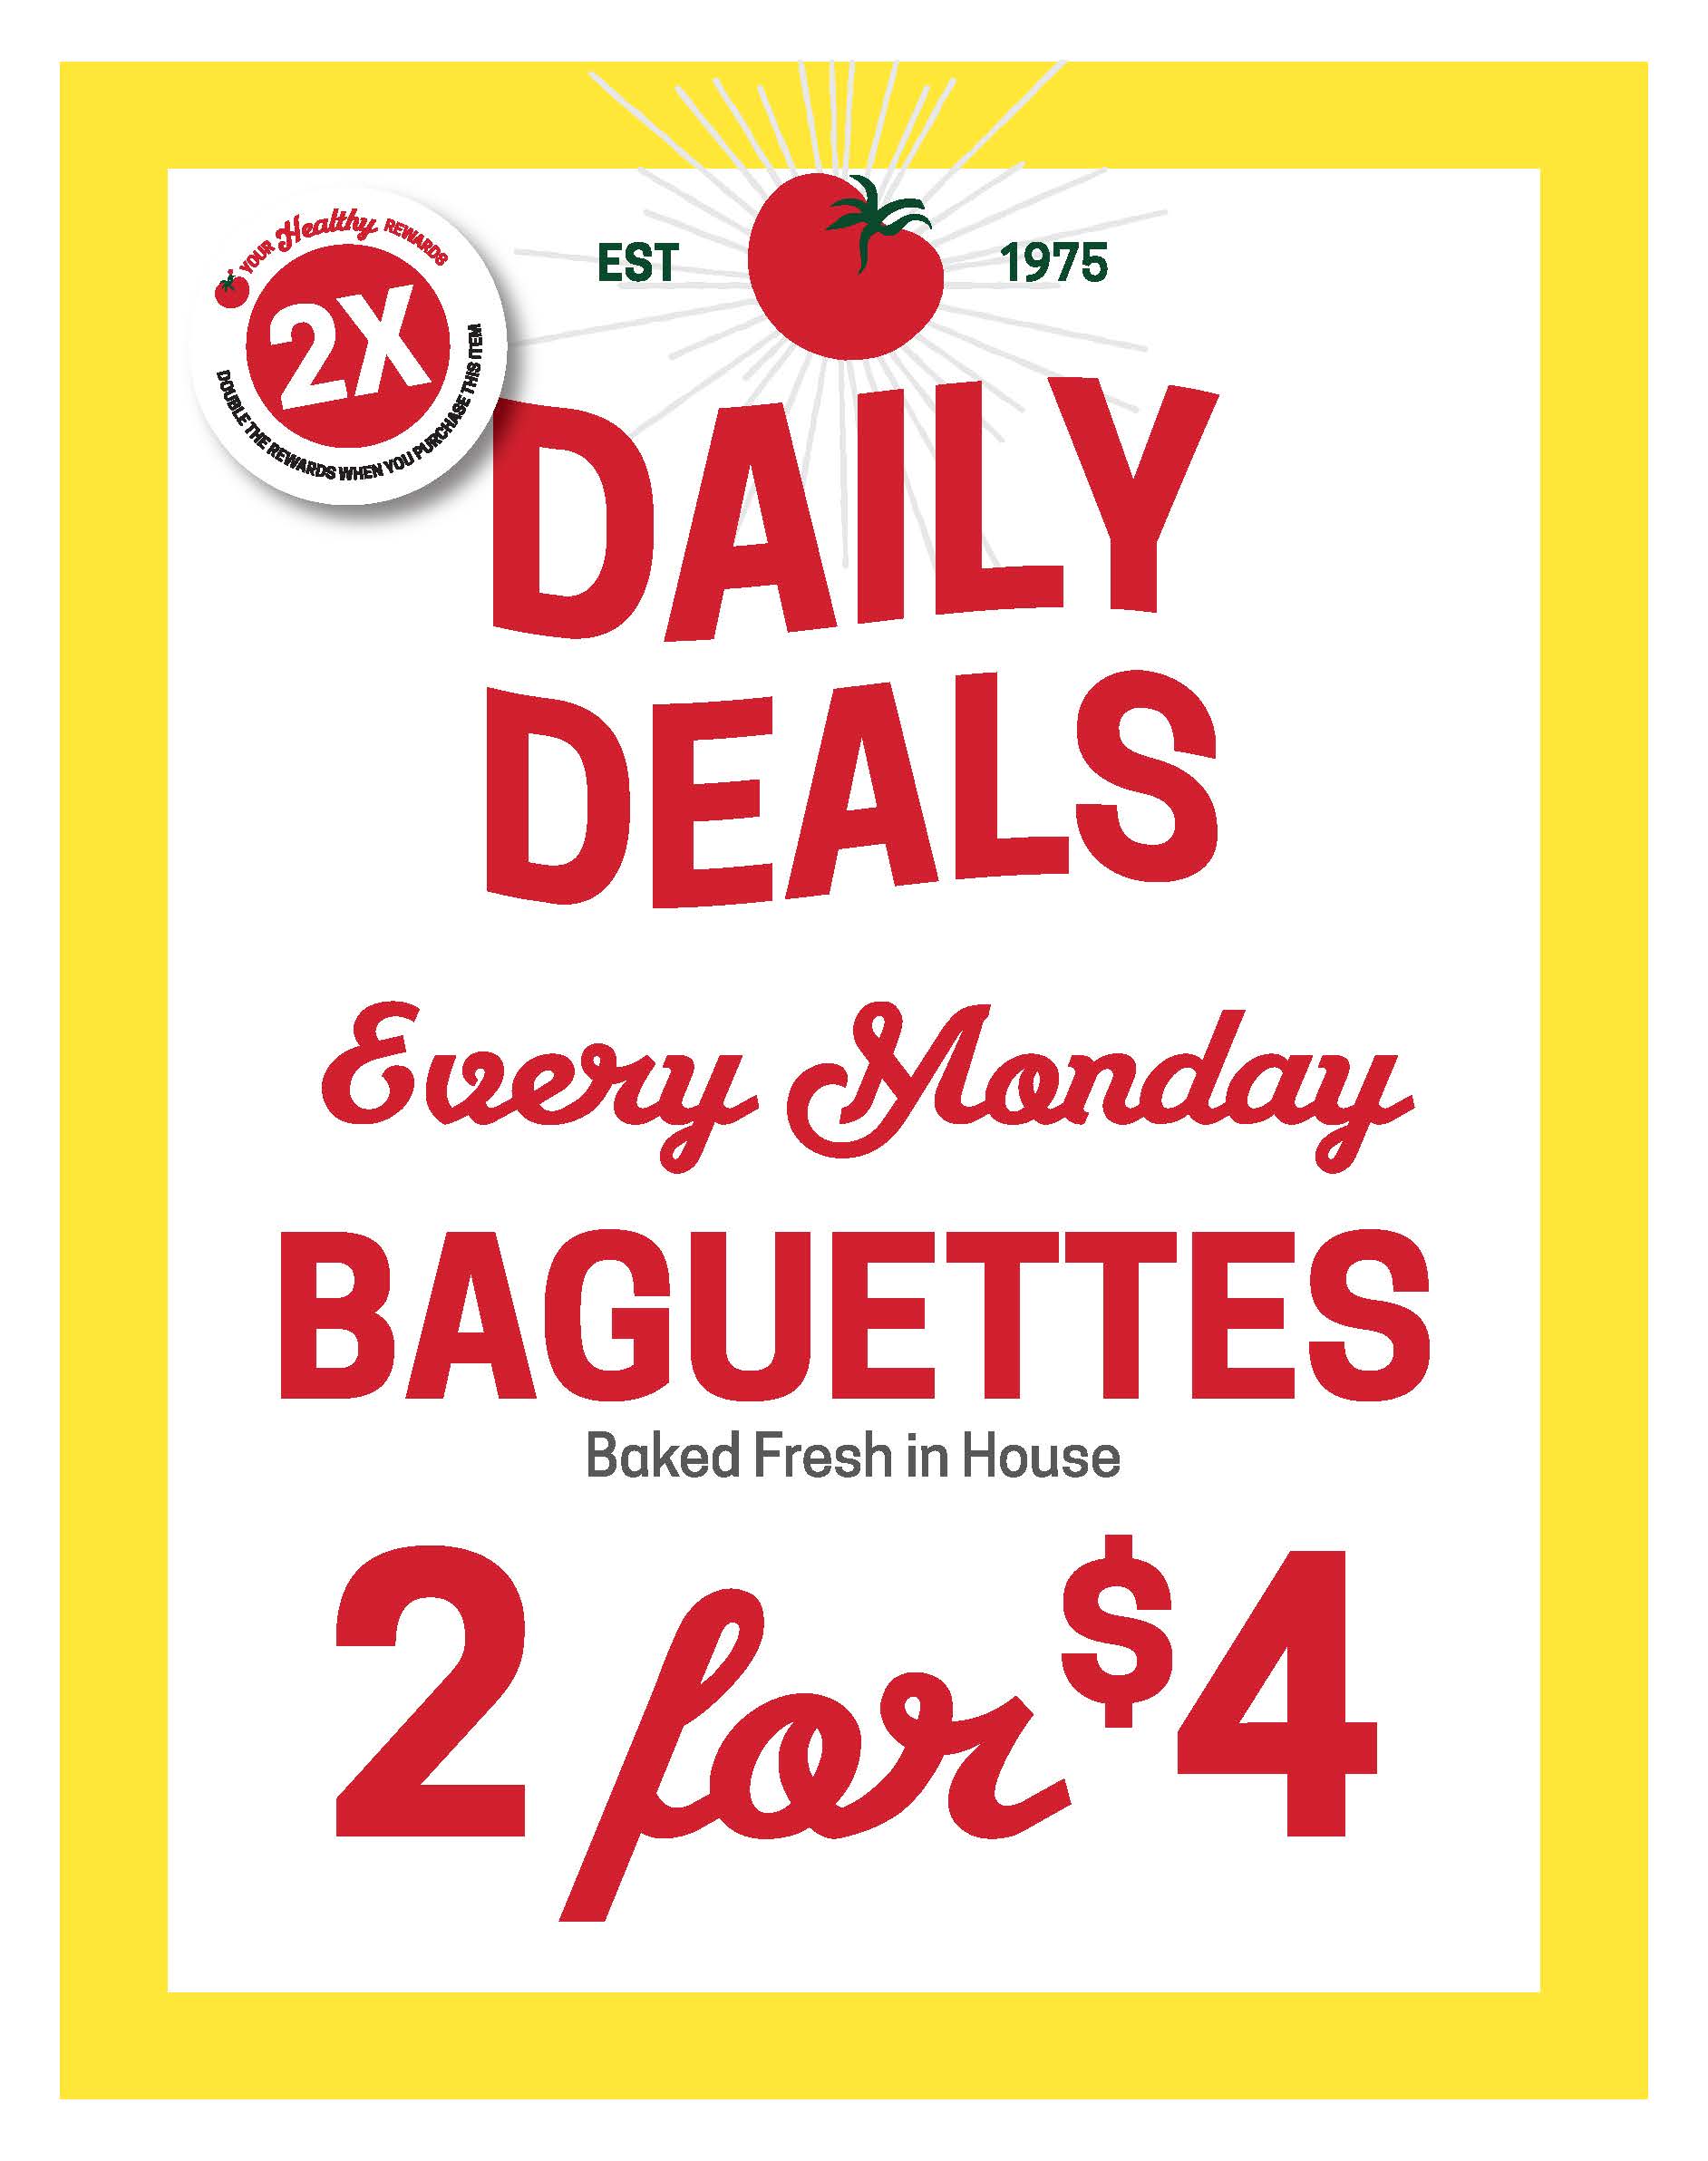 Daily Deals at Earth Fare  Earth Fare Natural Food Stores